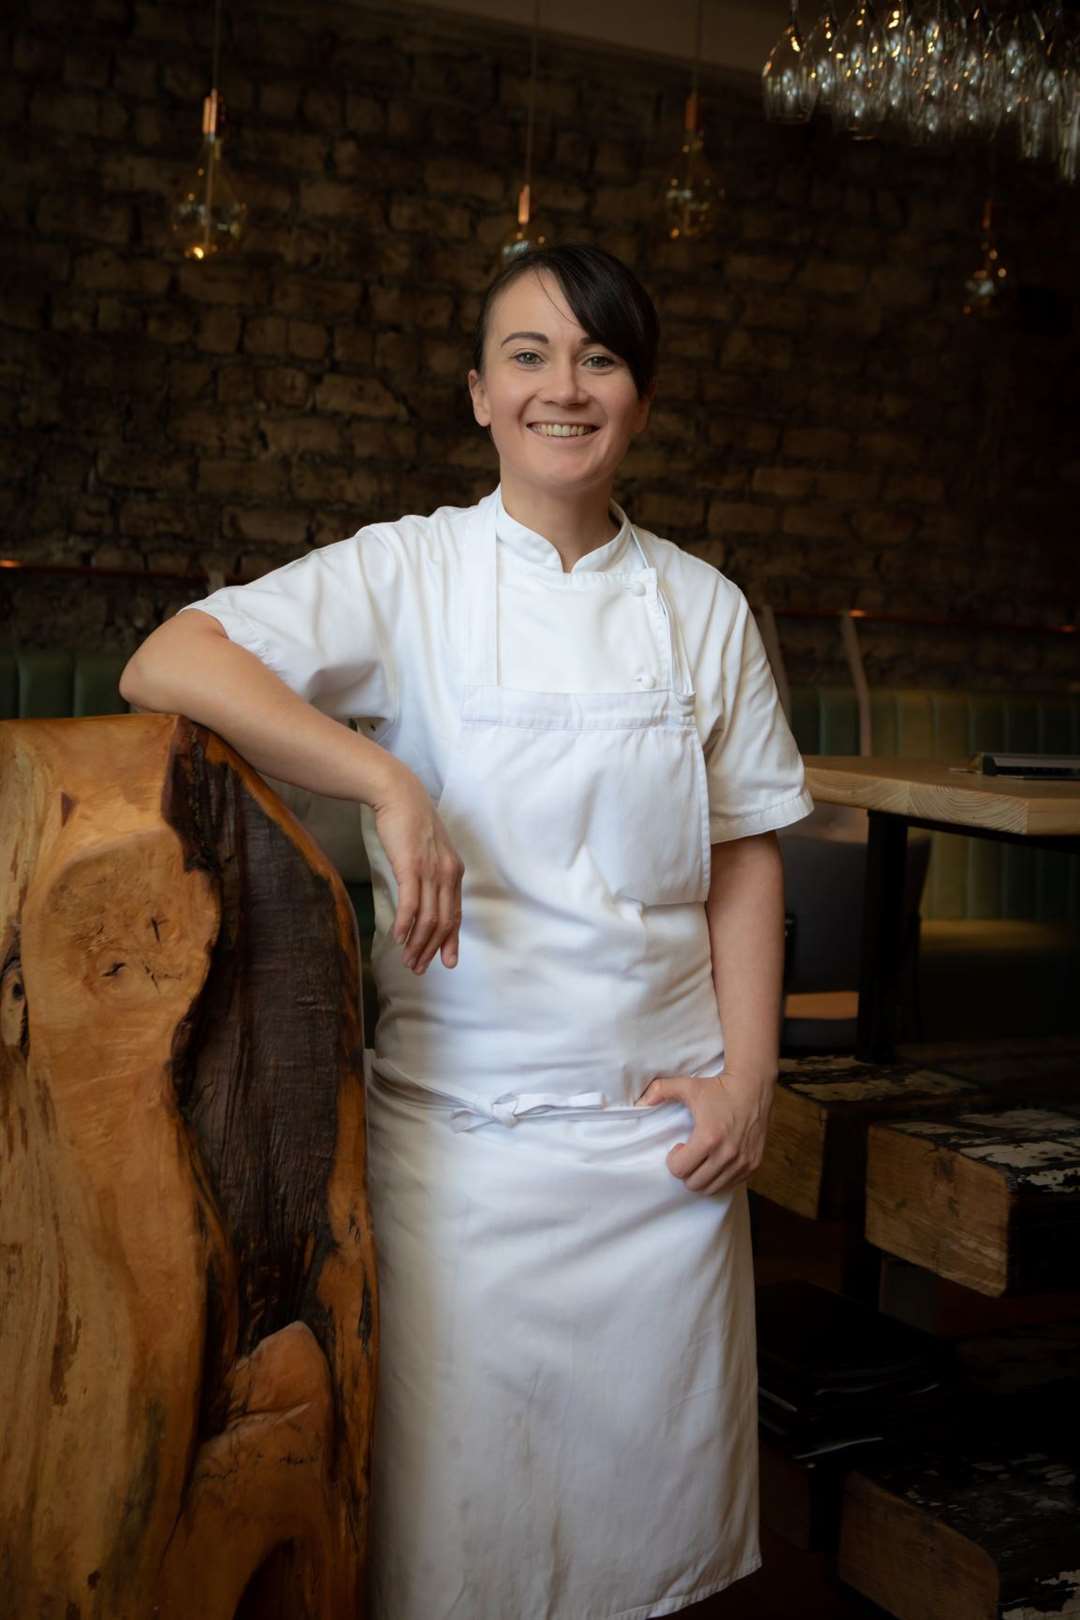 Chef Lorna Mcnee is relishing her new role in Glasgow.